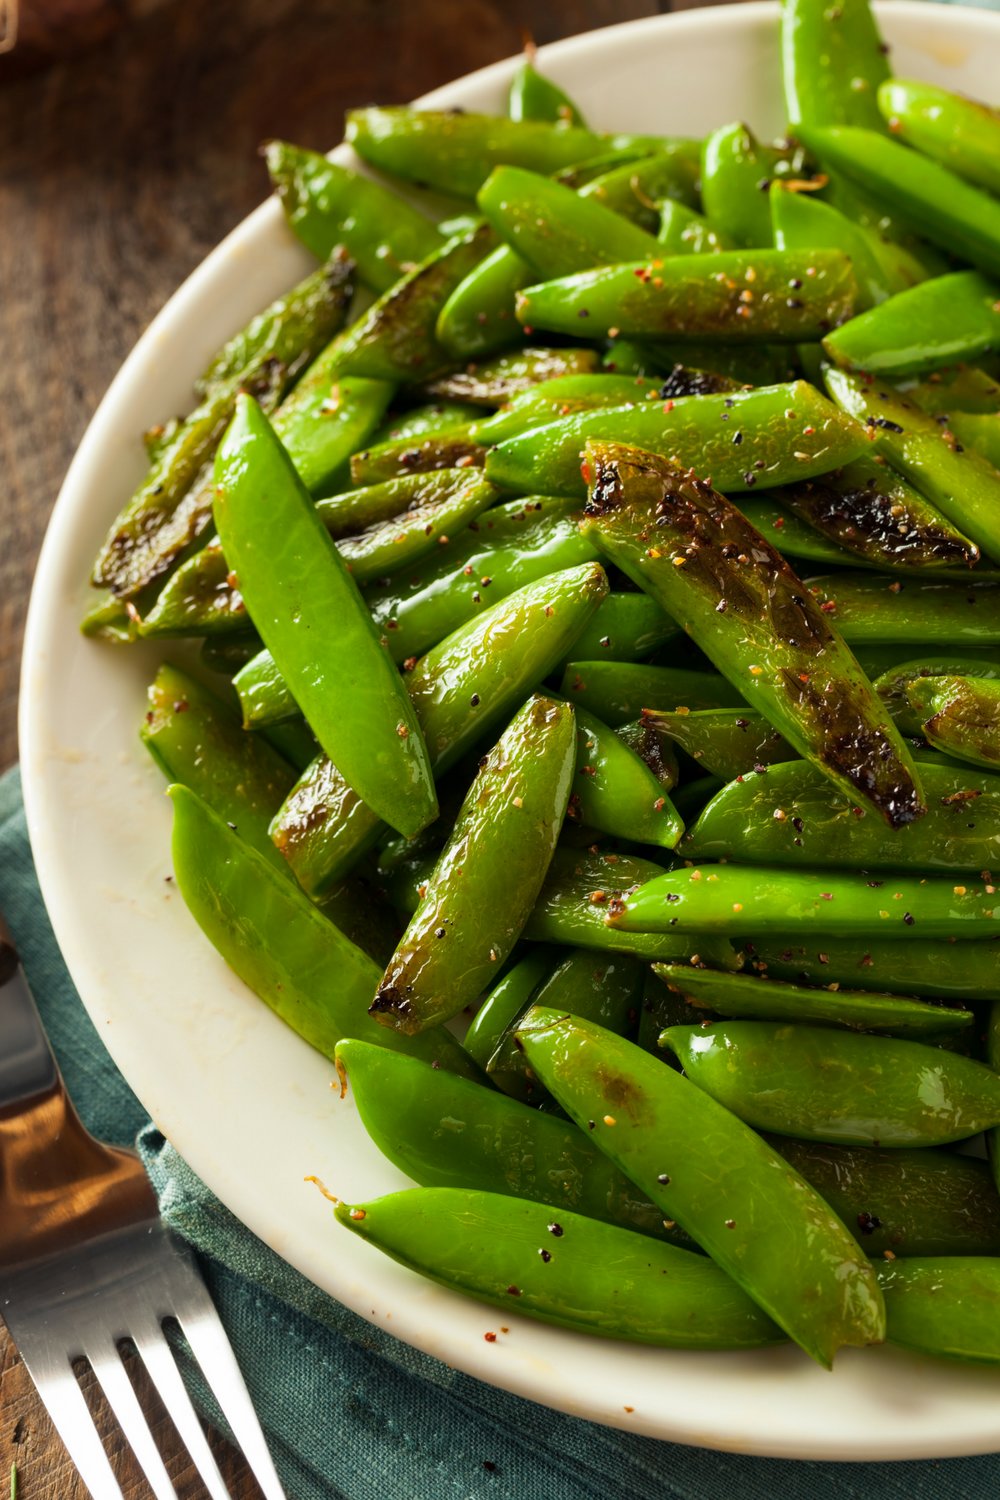 Sauteed sugar snap peas on a plate that are lightly browned.